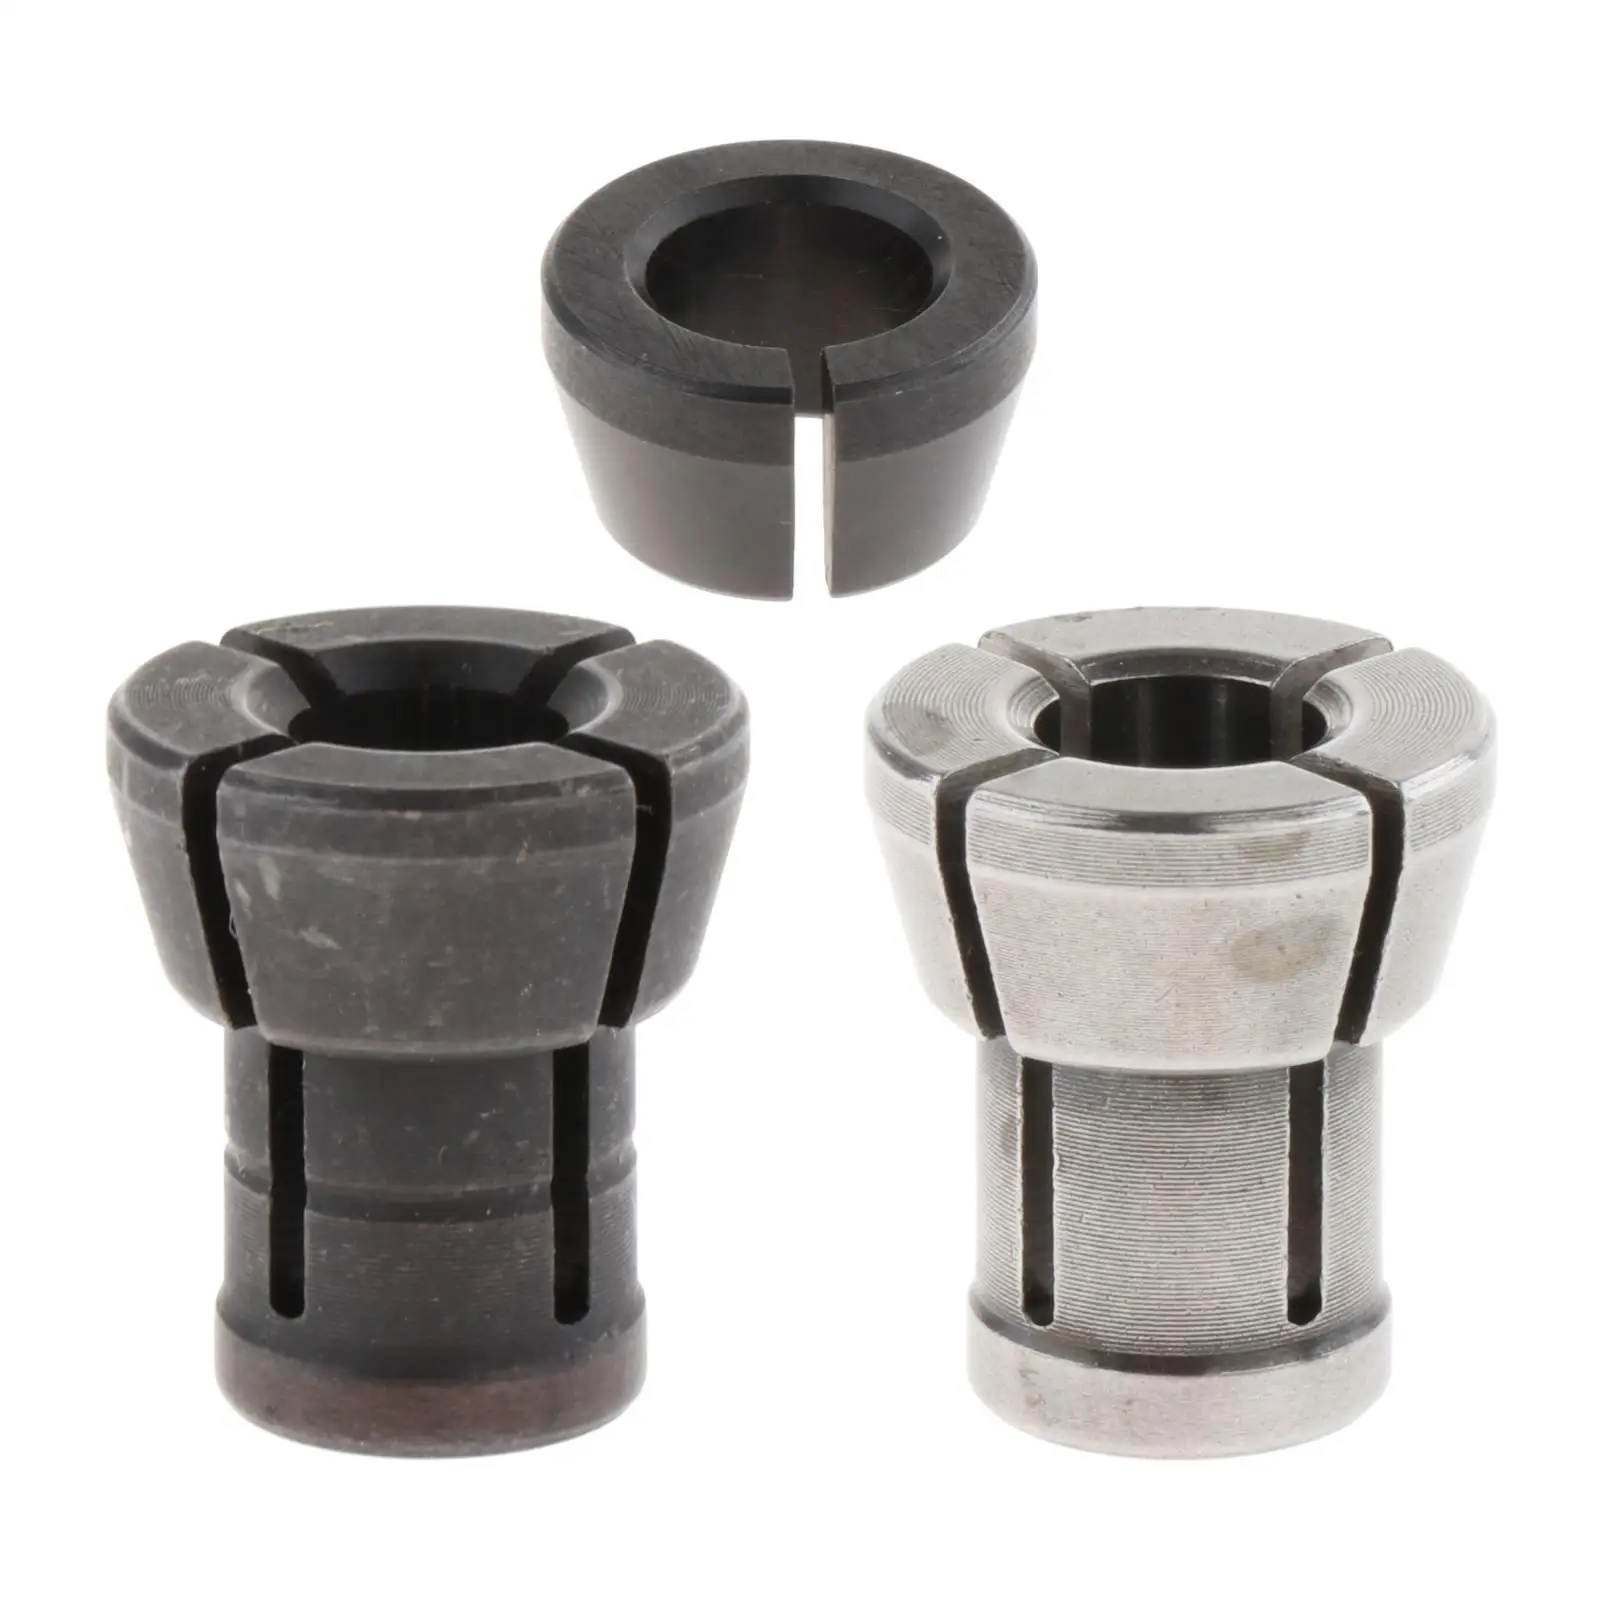 Carbon Steel High Precision Adapter Collet Replacement Collet Chuck for Engraving Trimming Machine Accessories Parts